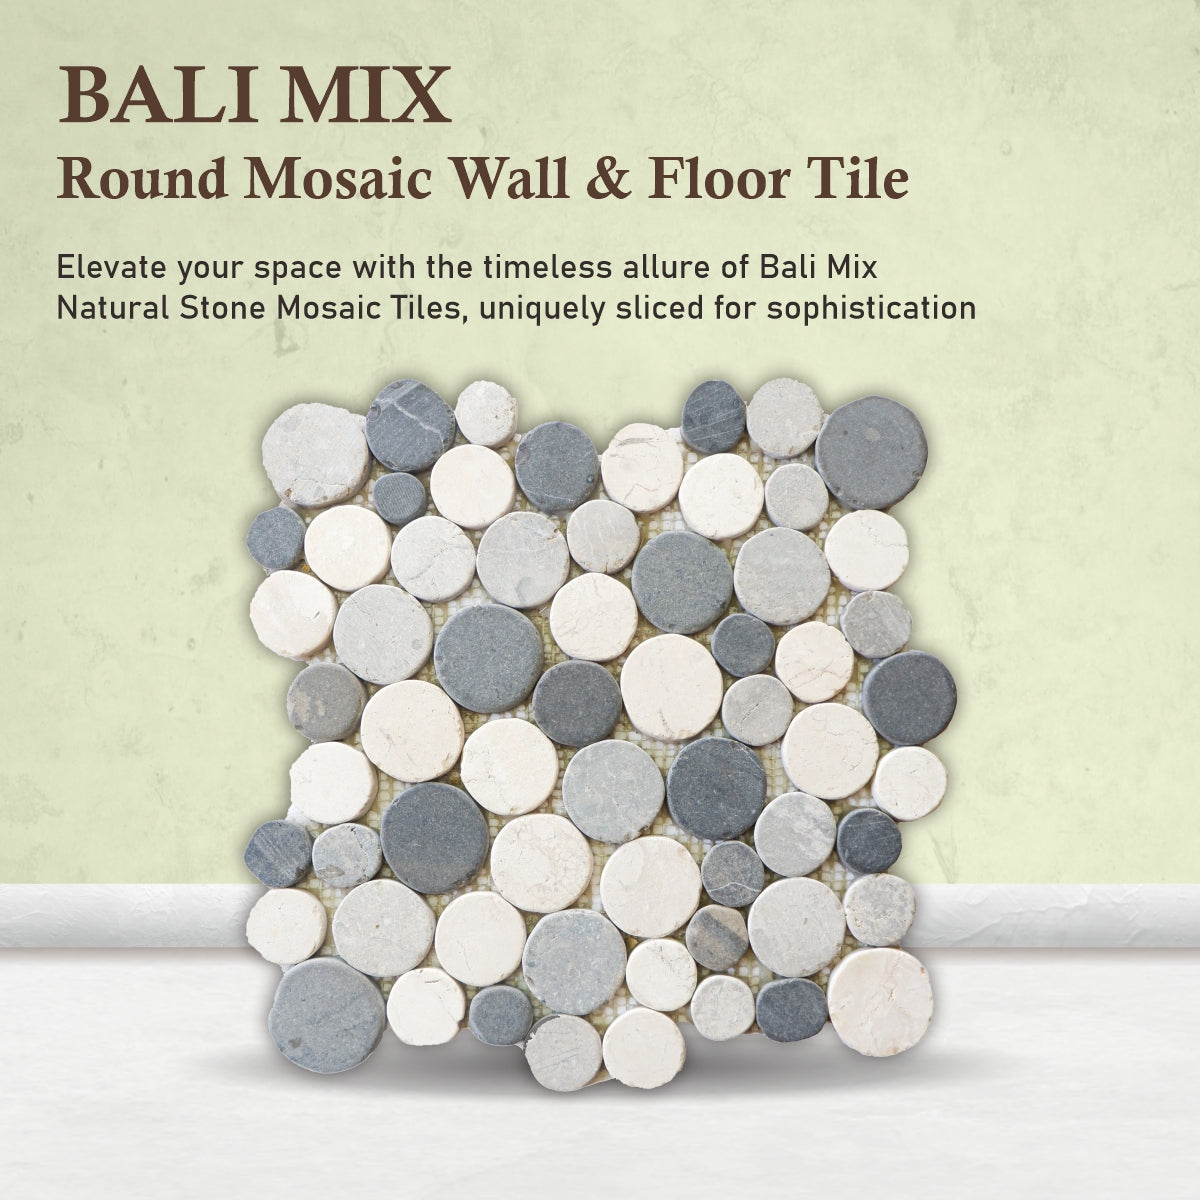 Bali Mix Penny Round Marble Tile, Stone Mosaic for Wall & Floor Tile